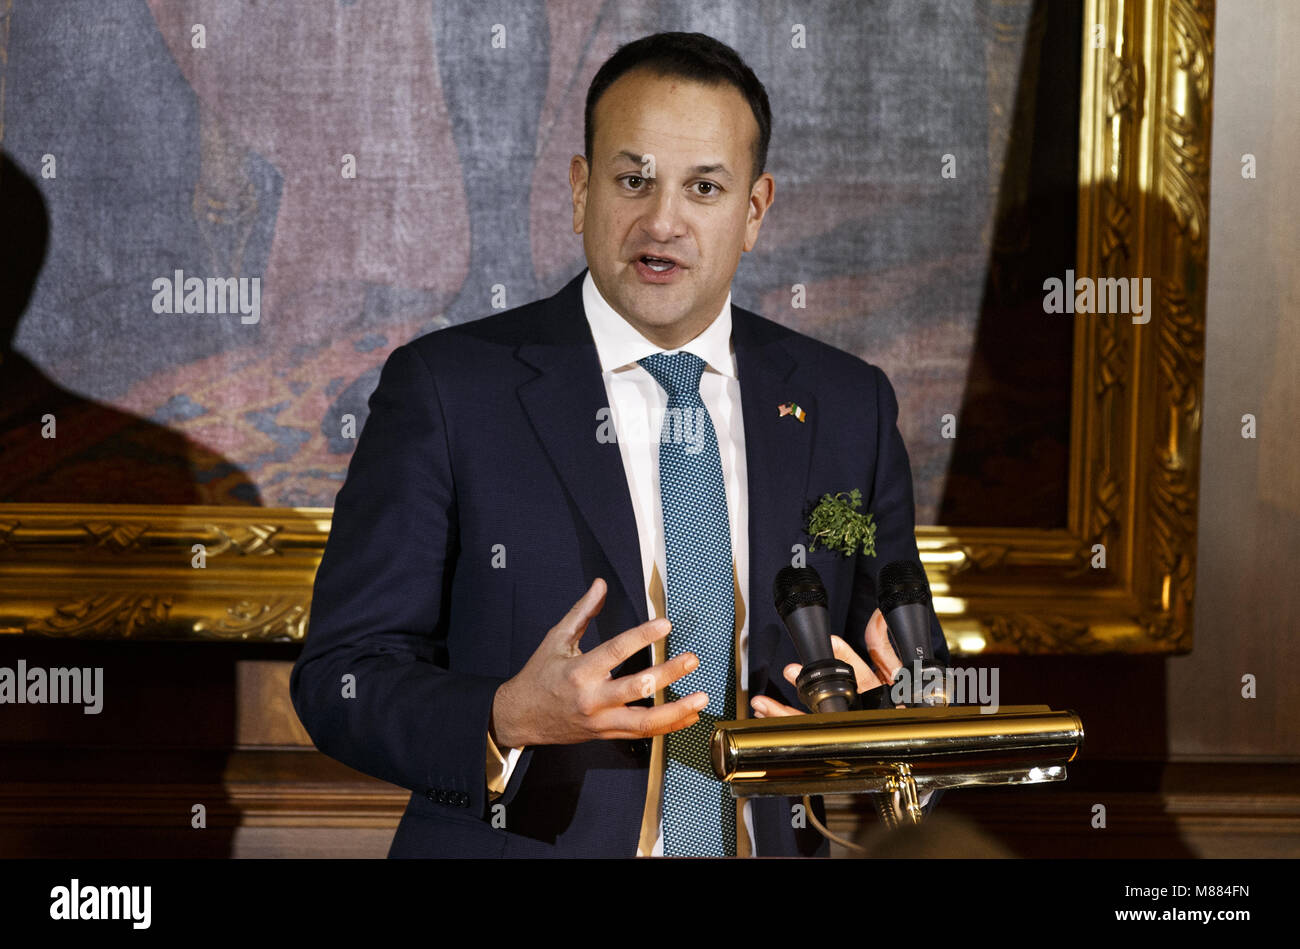 Washington, District of Columbia, USA. 15th Mar, 2018. Prime Minister of Ireland Leo Varadkar speaks at the Friends of Ireland luncheon hosted by United States Speaker of the House of Representatives Paul Ryan, Republican of Wisconsin, at the United States Capitol in Washington, DC on March 15, 2018. Credit: Alex Edelman/CNP Credit: Alex Edelman/CNP/ZUMA Wire/Alamy Live News Stock Photo